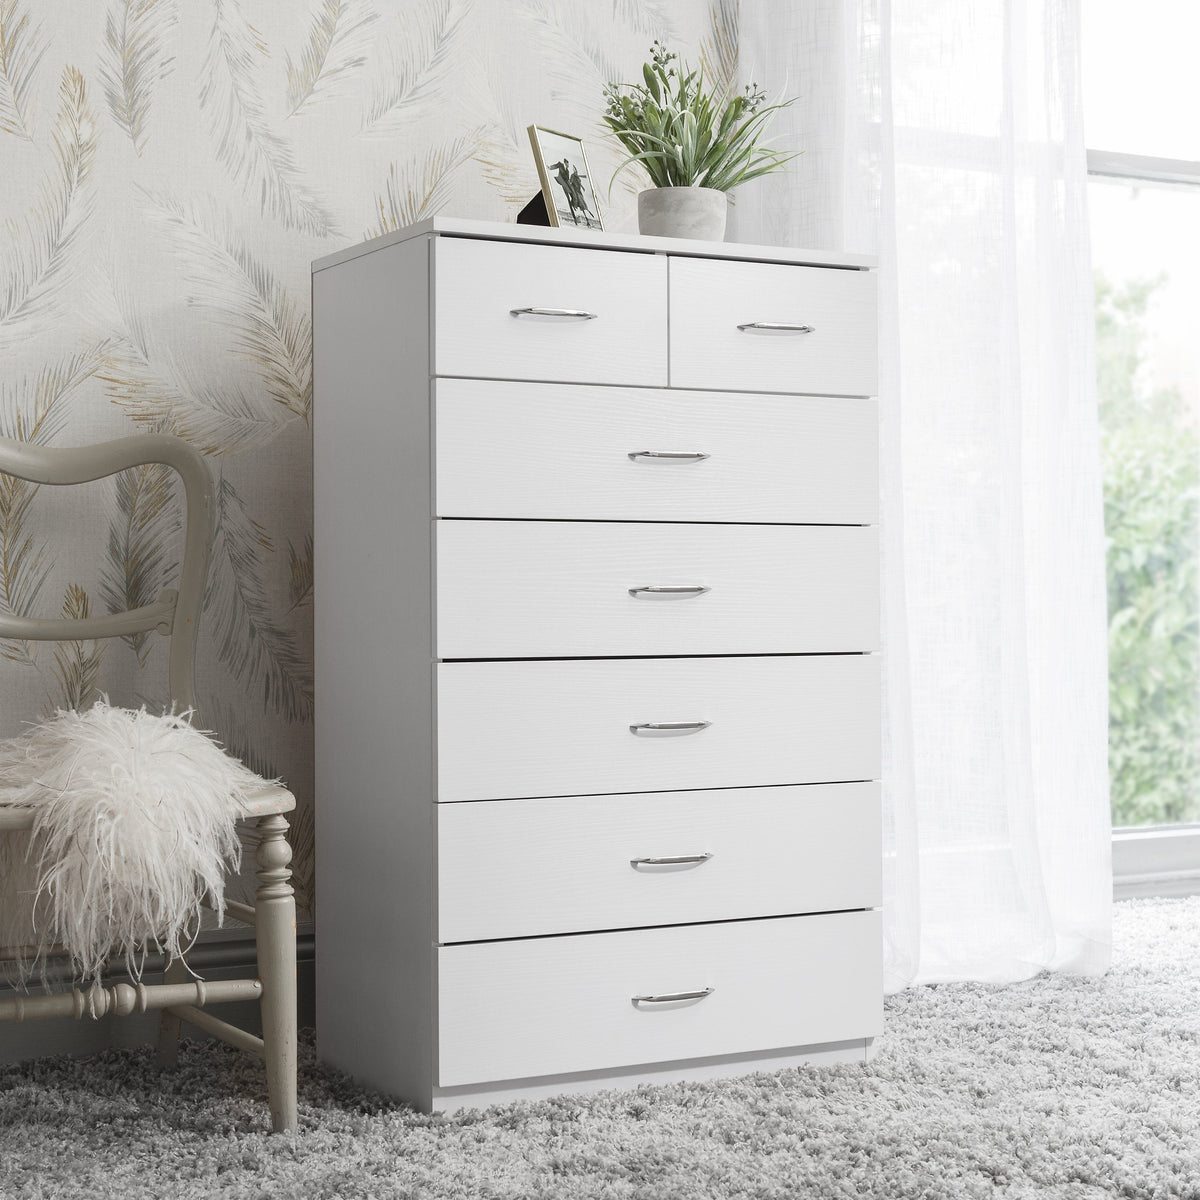 7 Drawer Tall Chest of Drawers in White